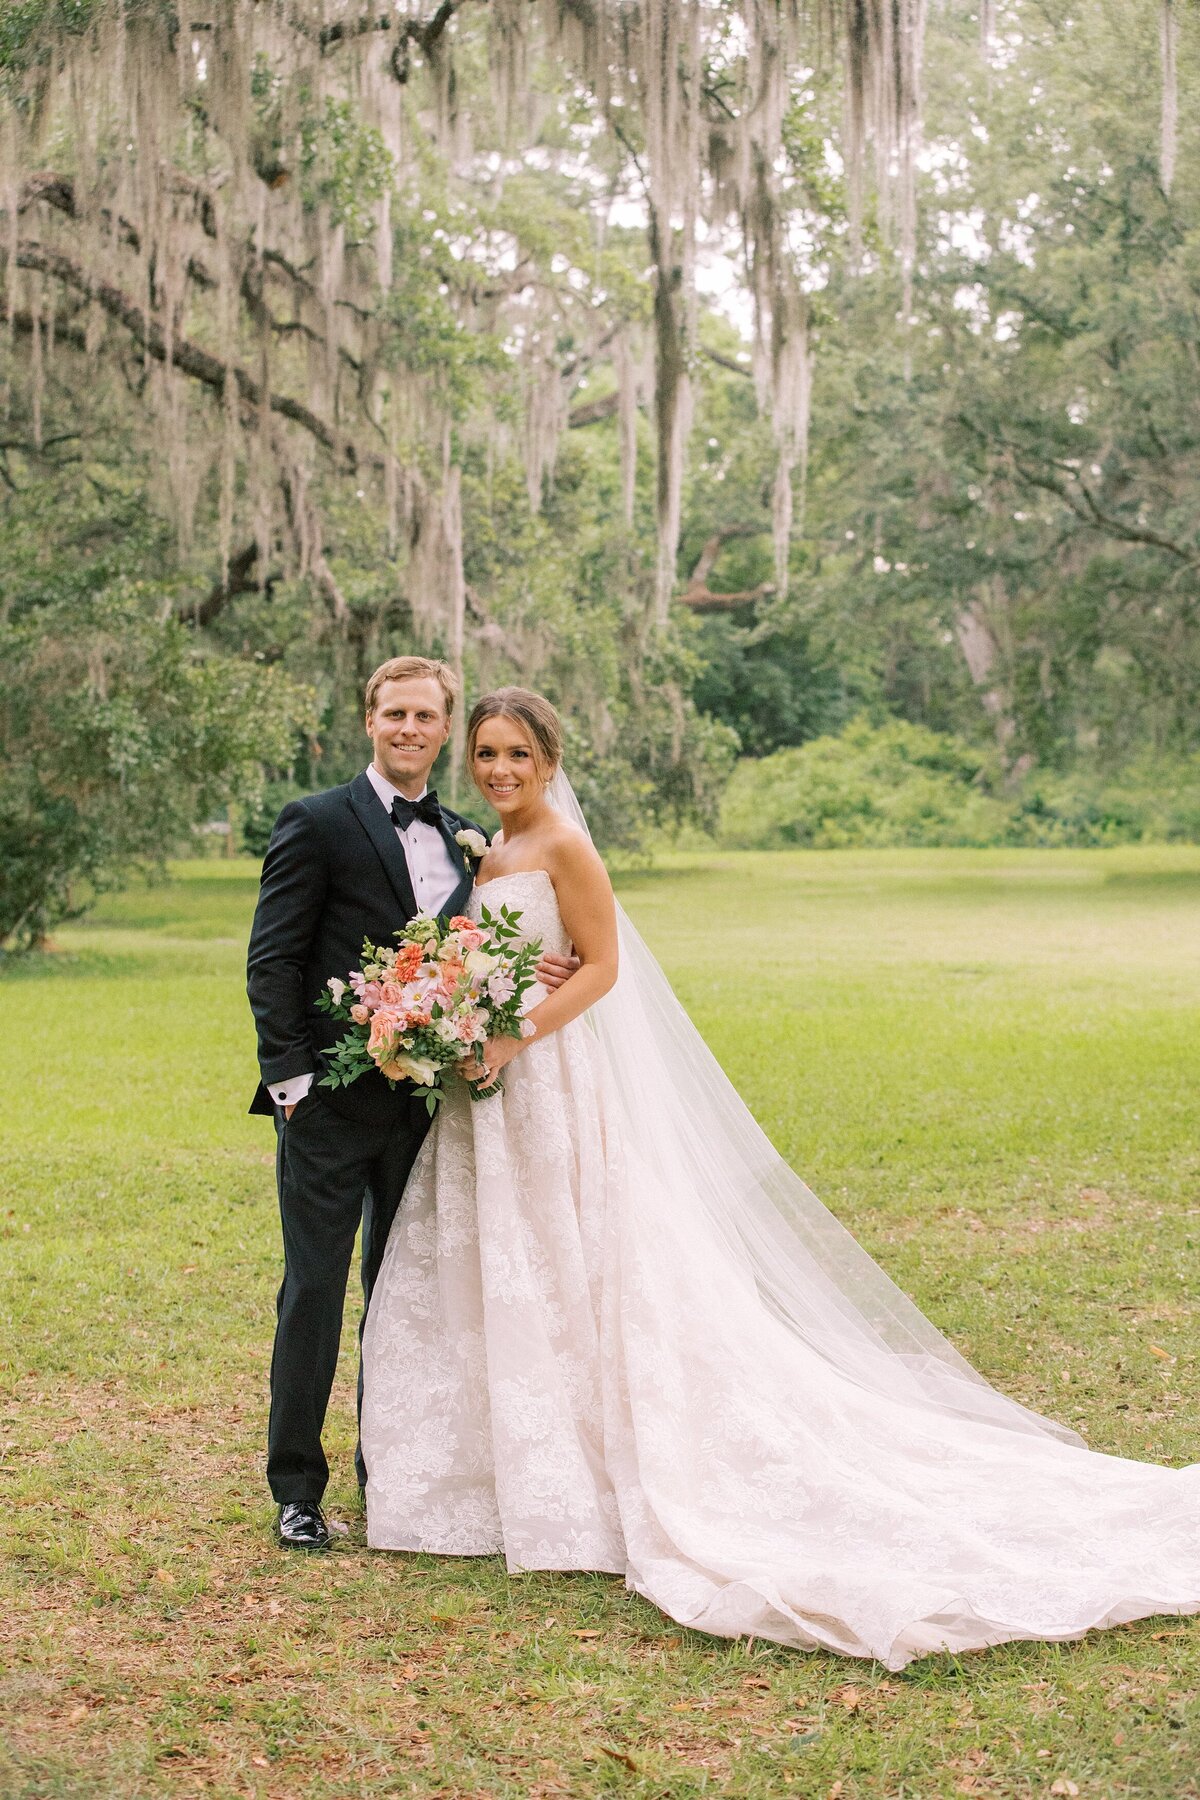 A wedding at the Goodwood Museum & Gardens in Tallahassee, FL - 27